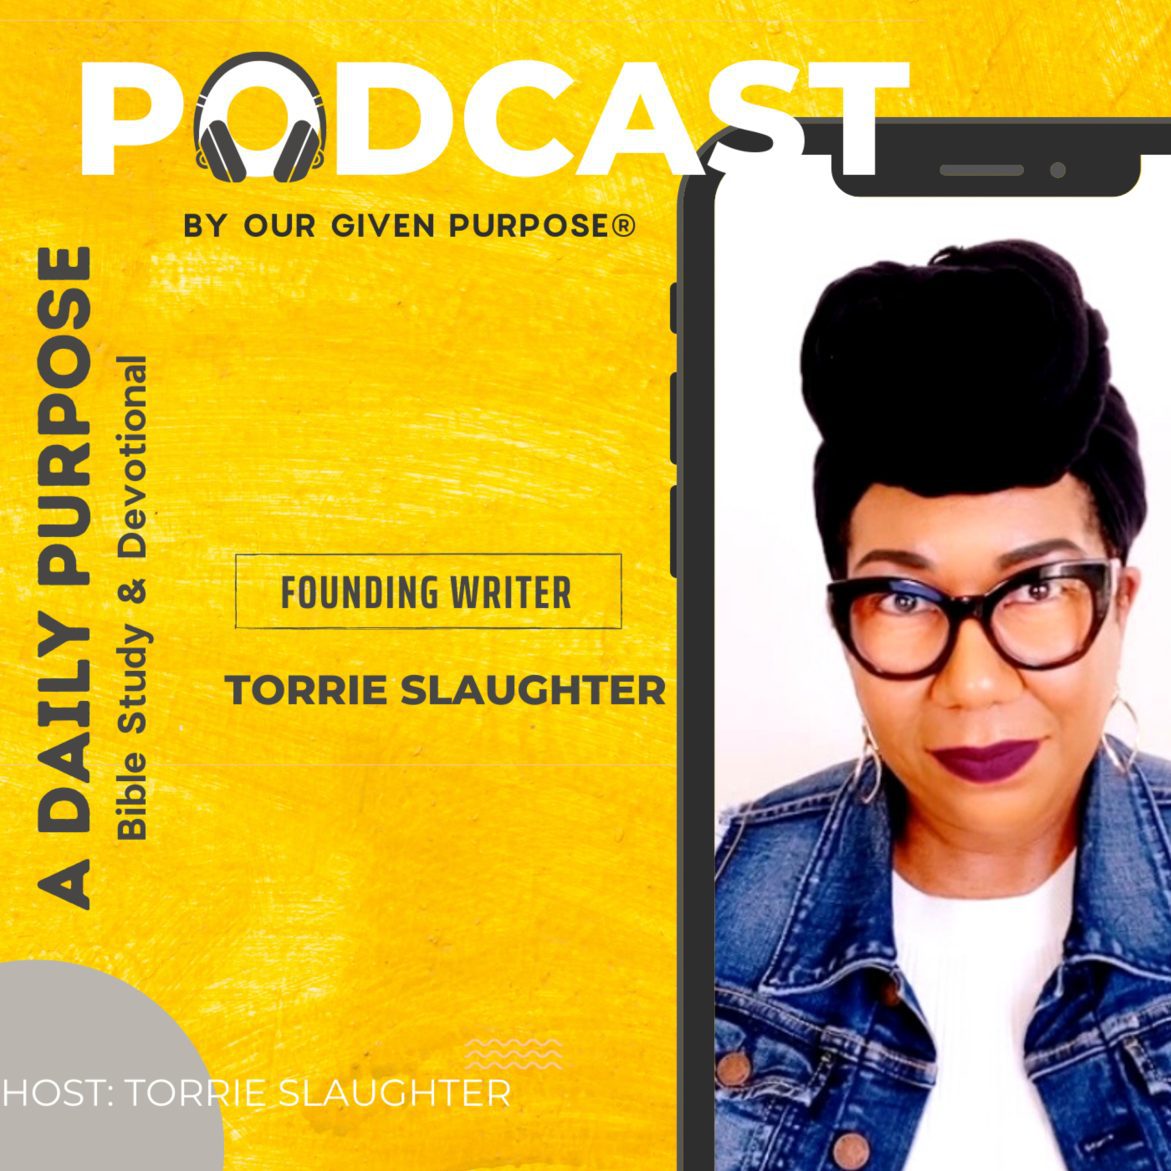 Black Podcasting - Day 306 Be Mindful by Torrie Slaughter